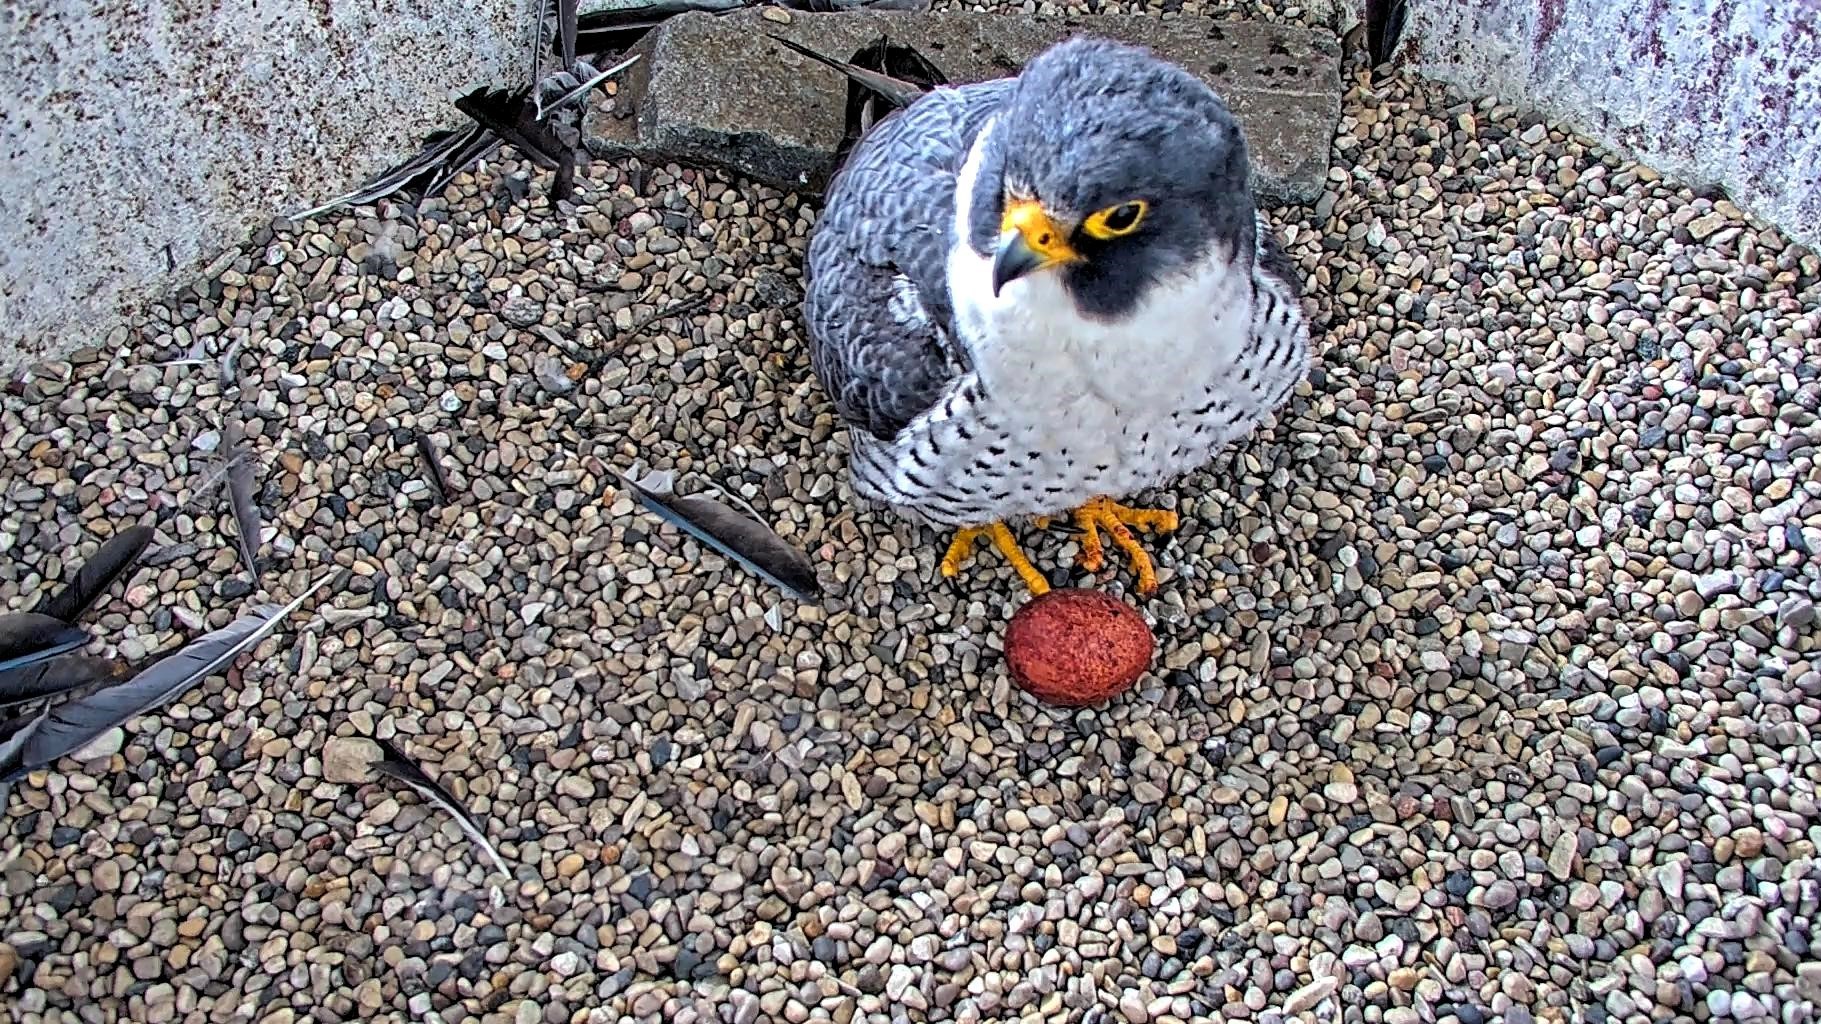 A peregrine falcon with blue-grey feathers stands over a reddish-orange egg on top of pea gravel.